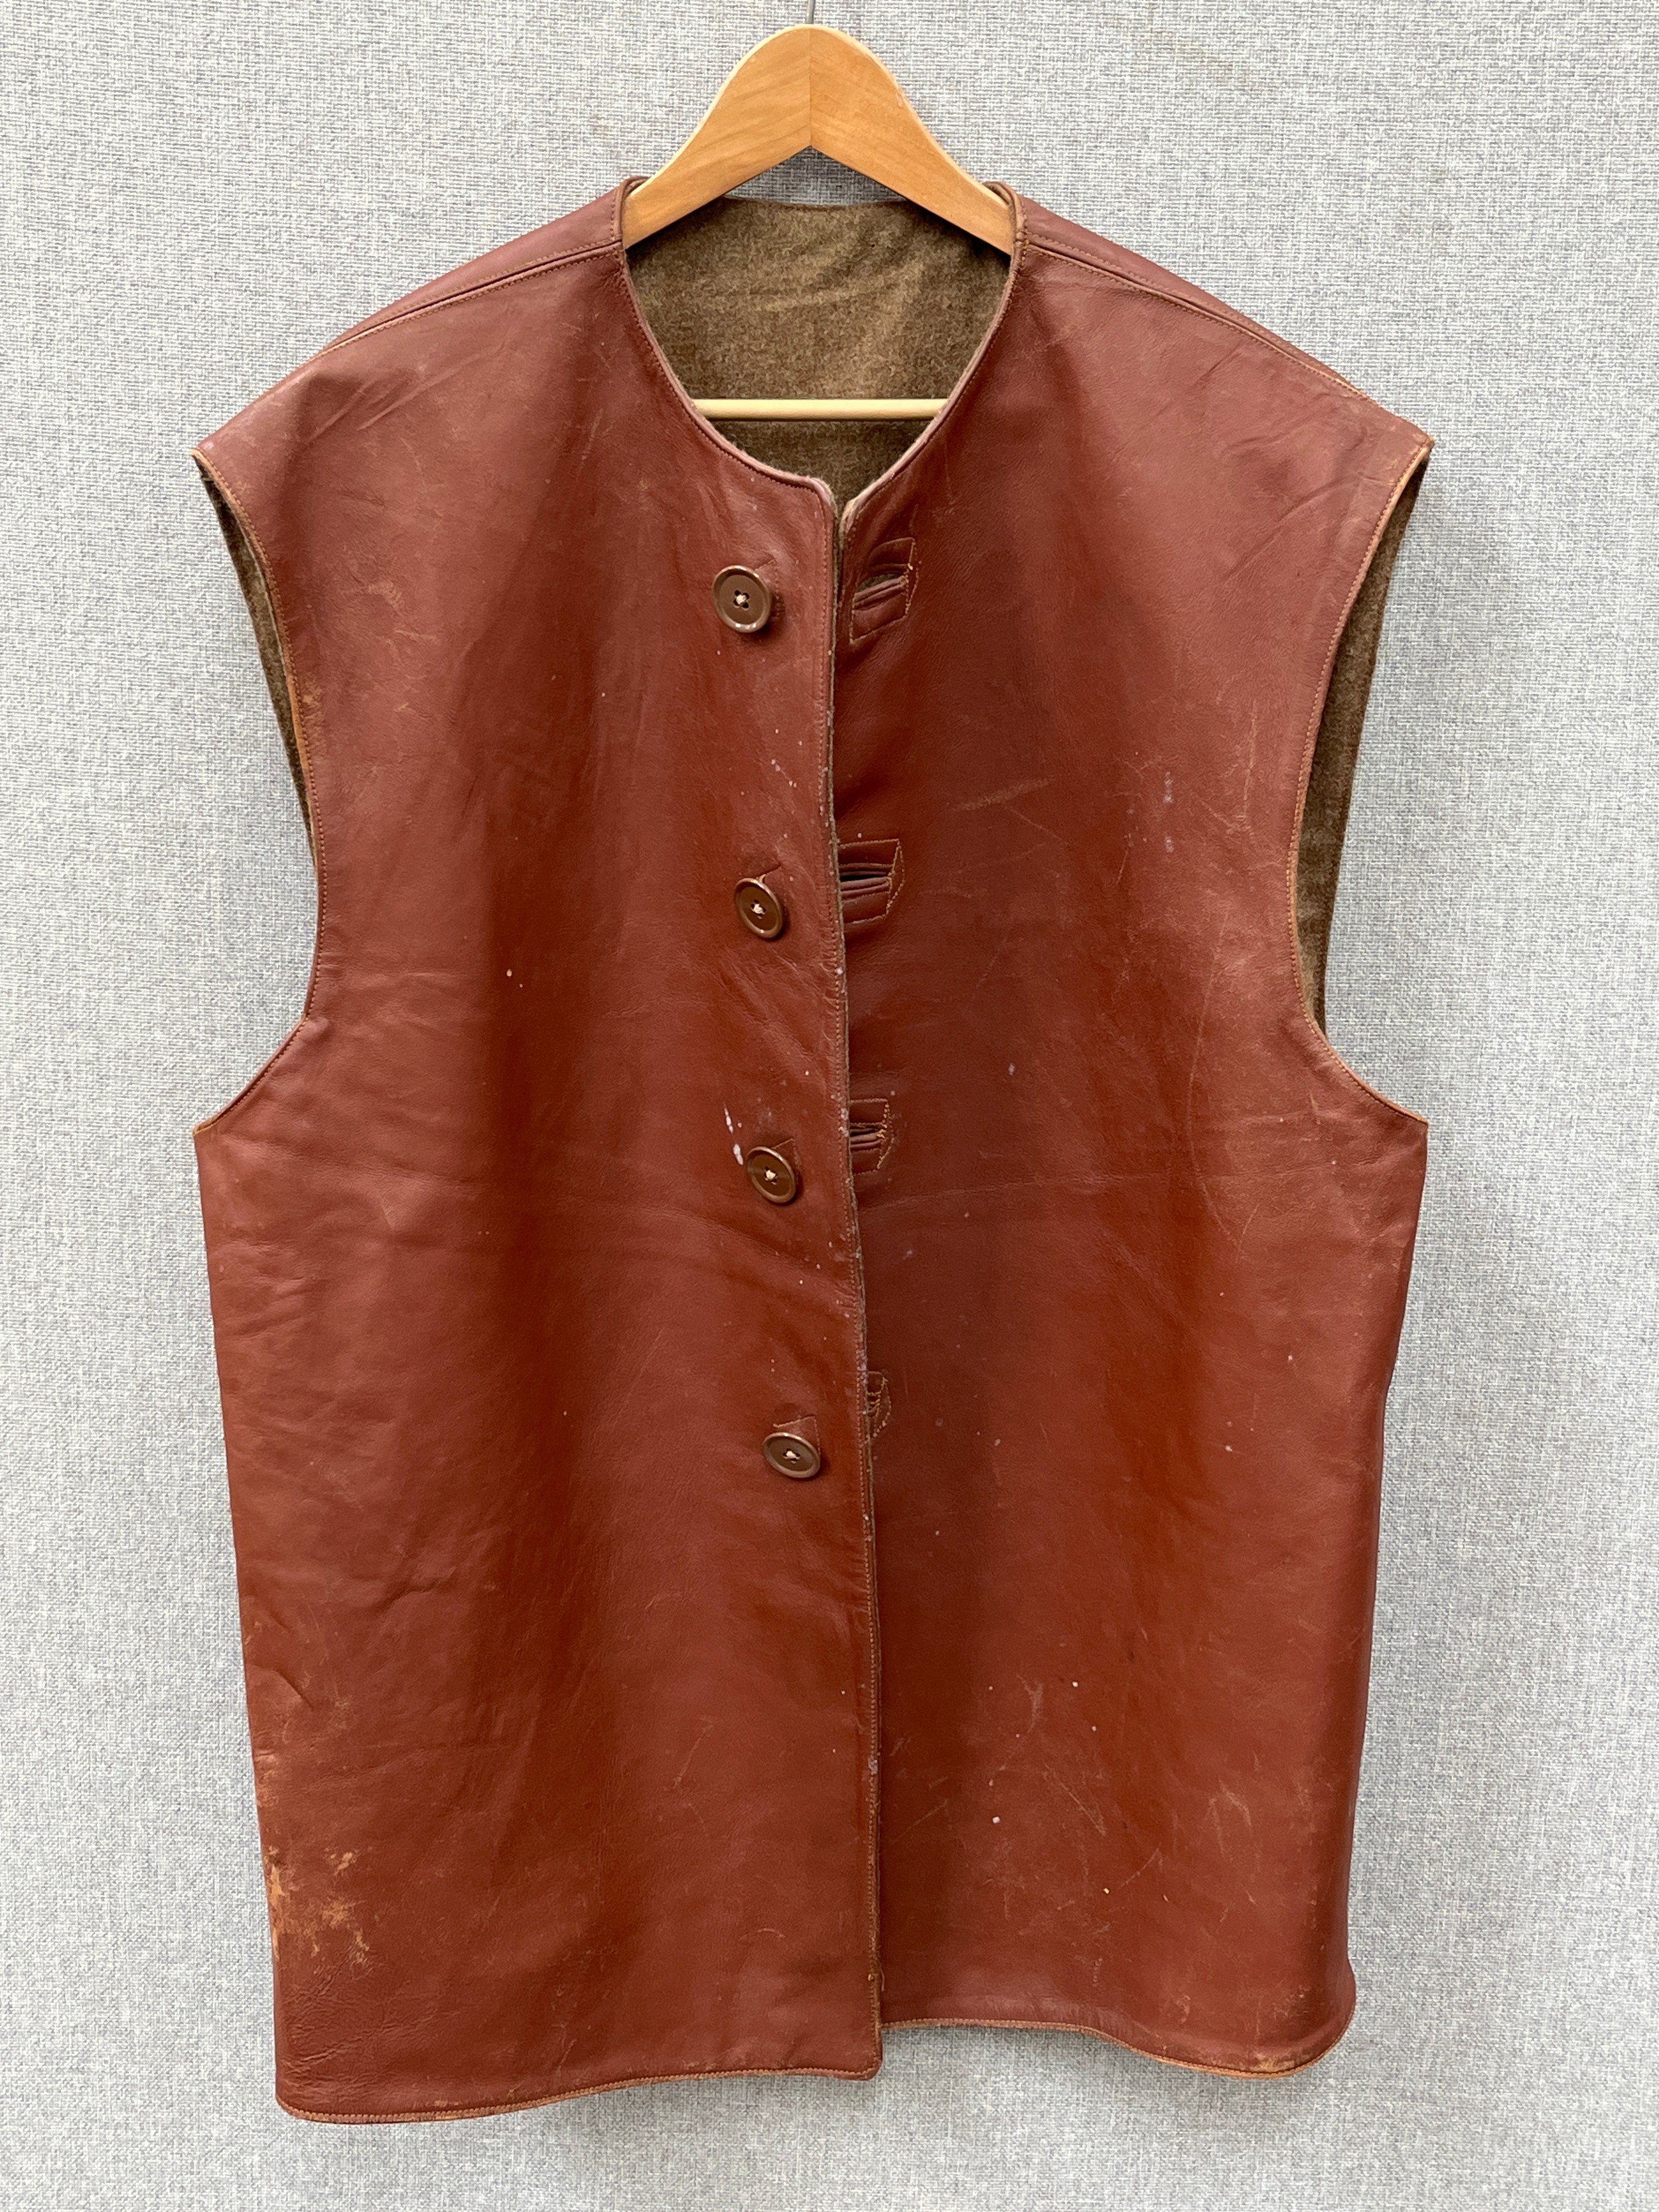 A WWII British leather jerkin, dated 1944, size no. 2